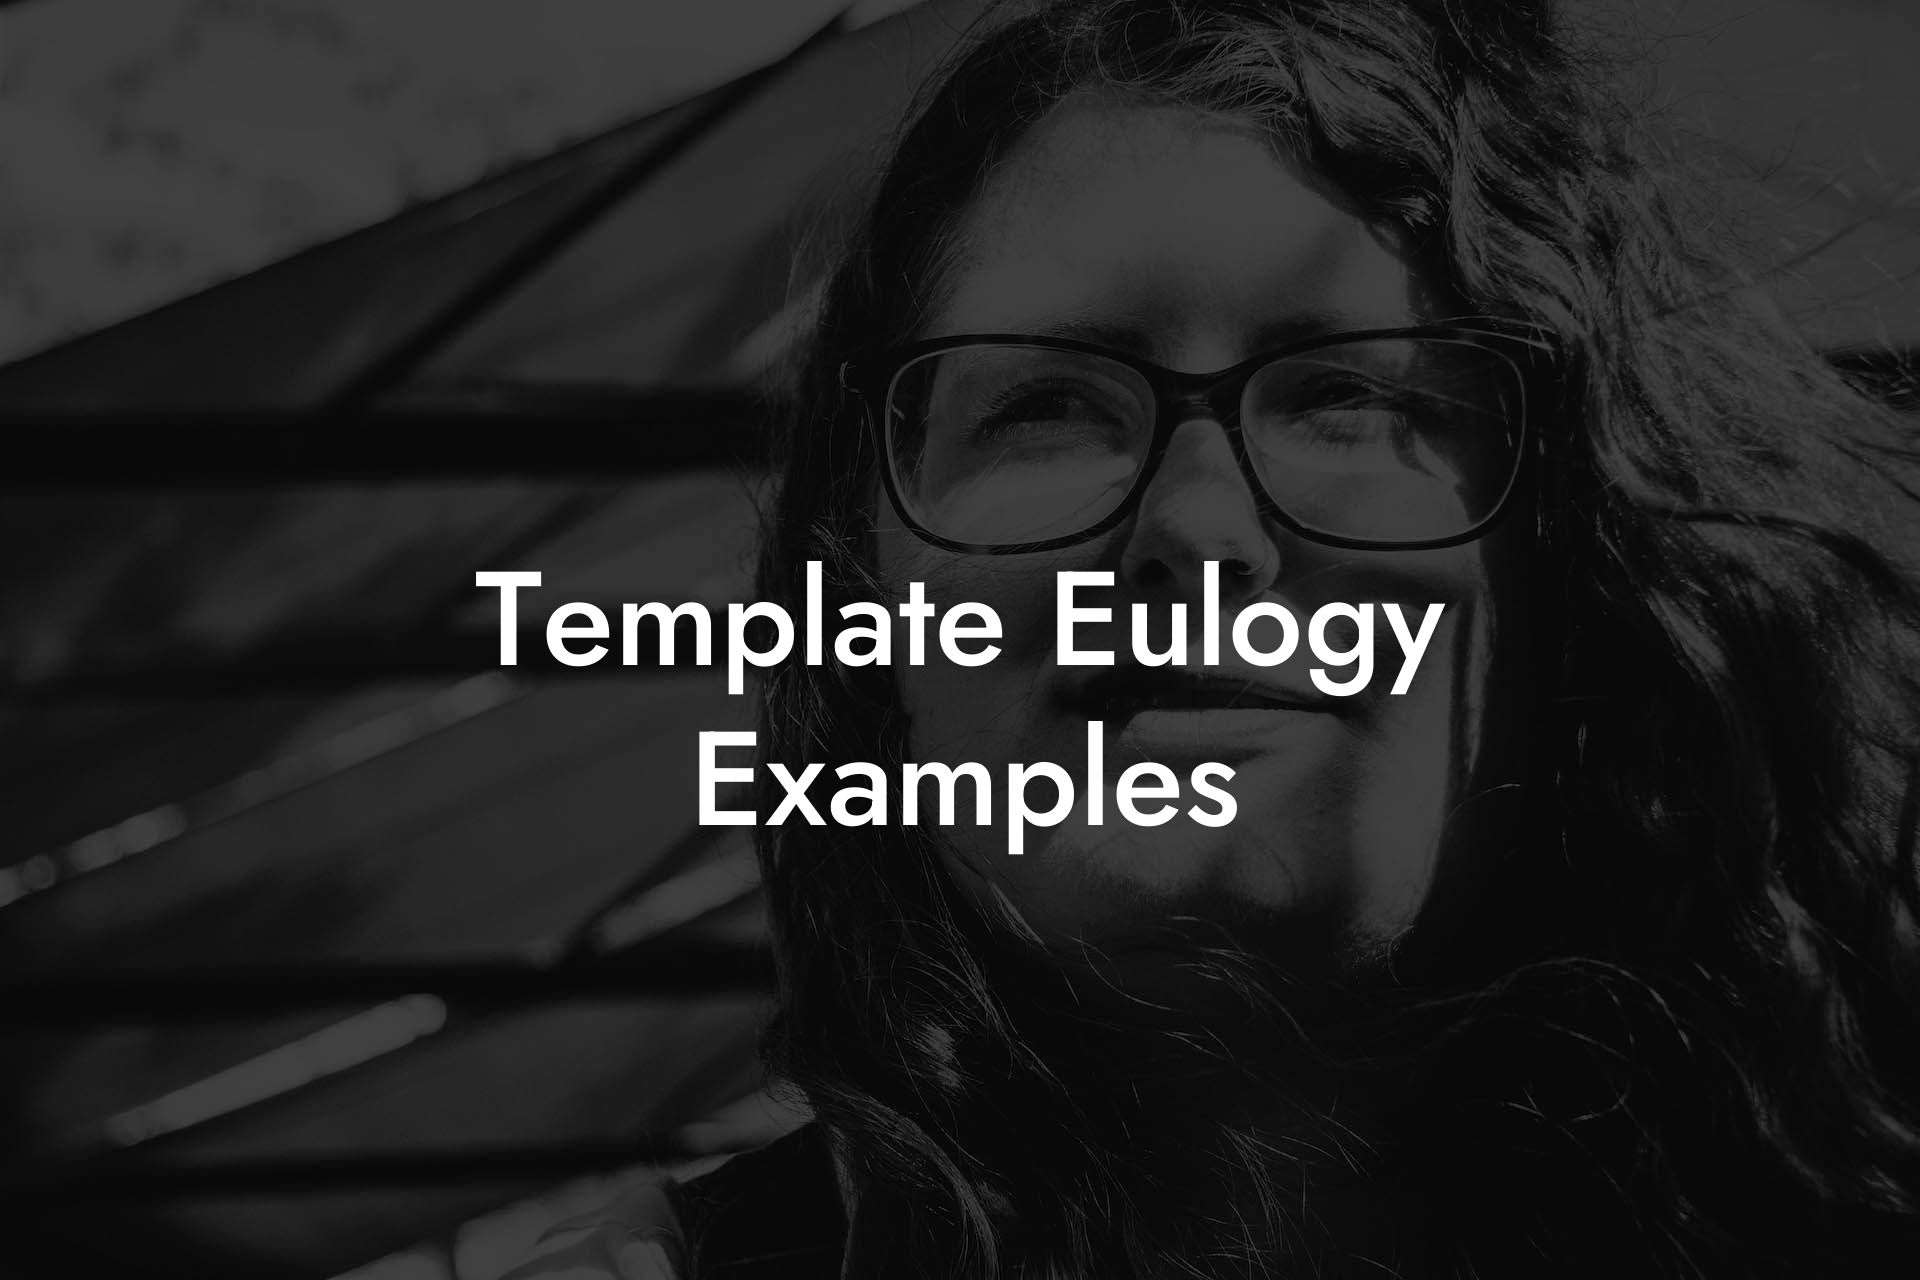 Template Eulogy Examples